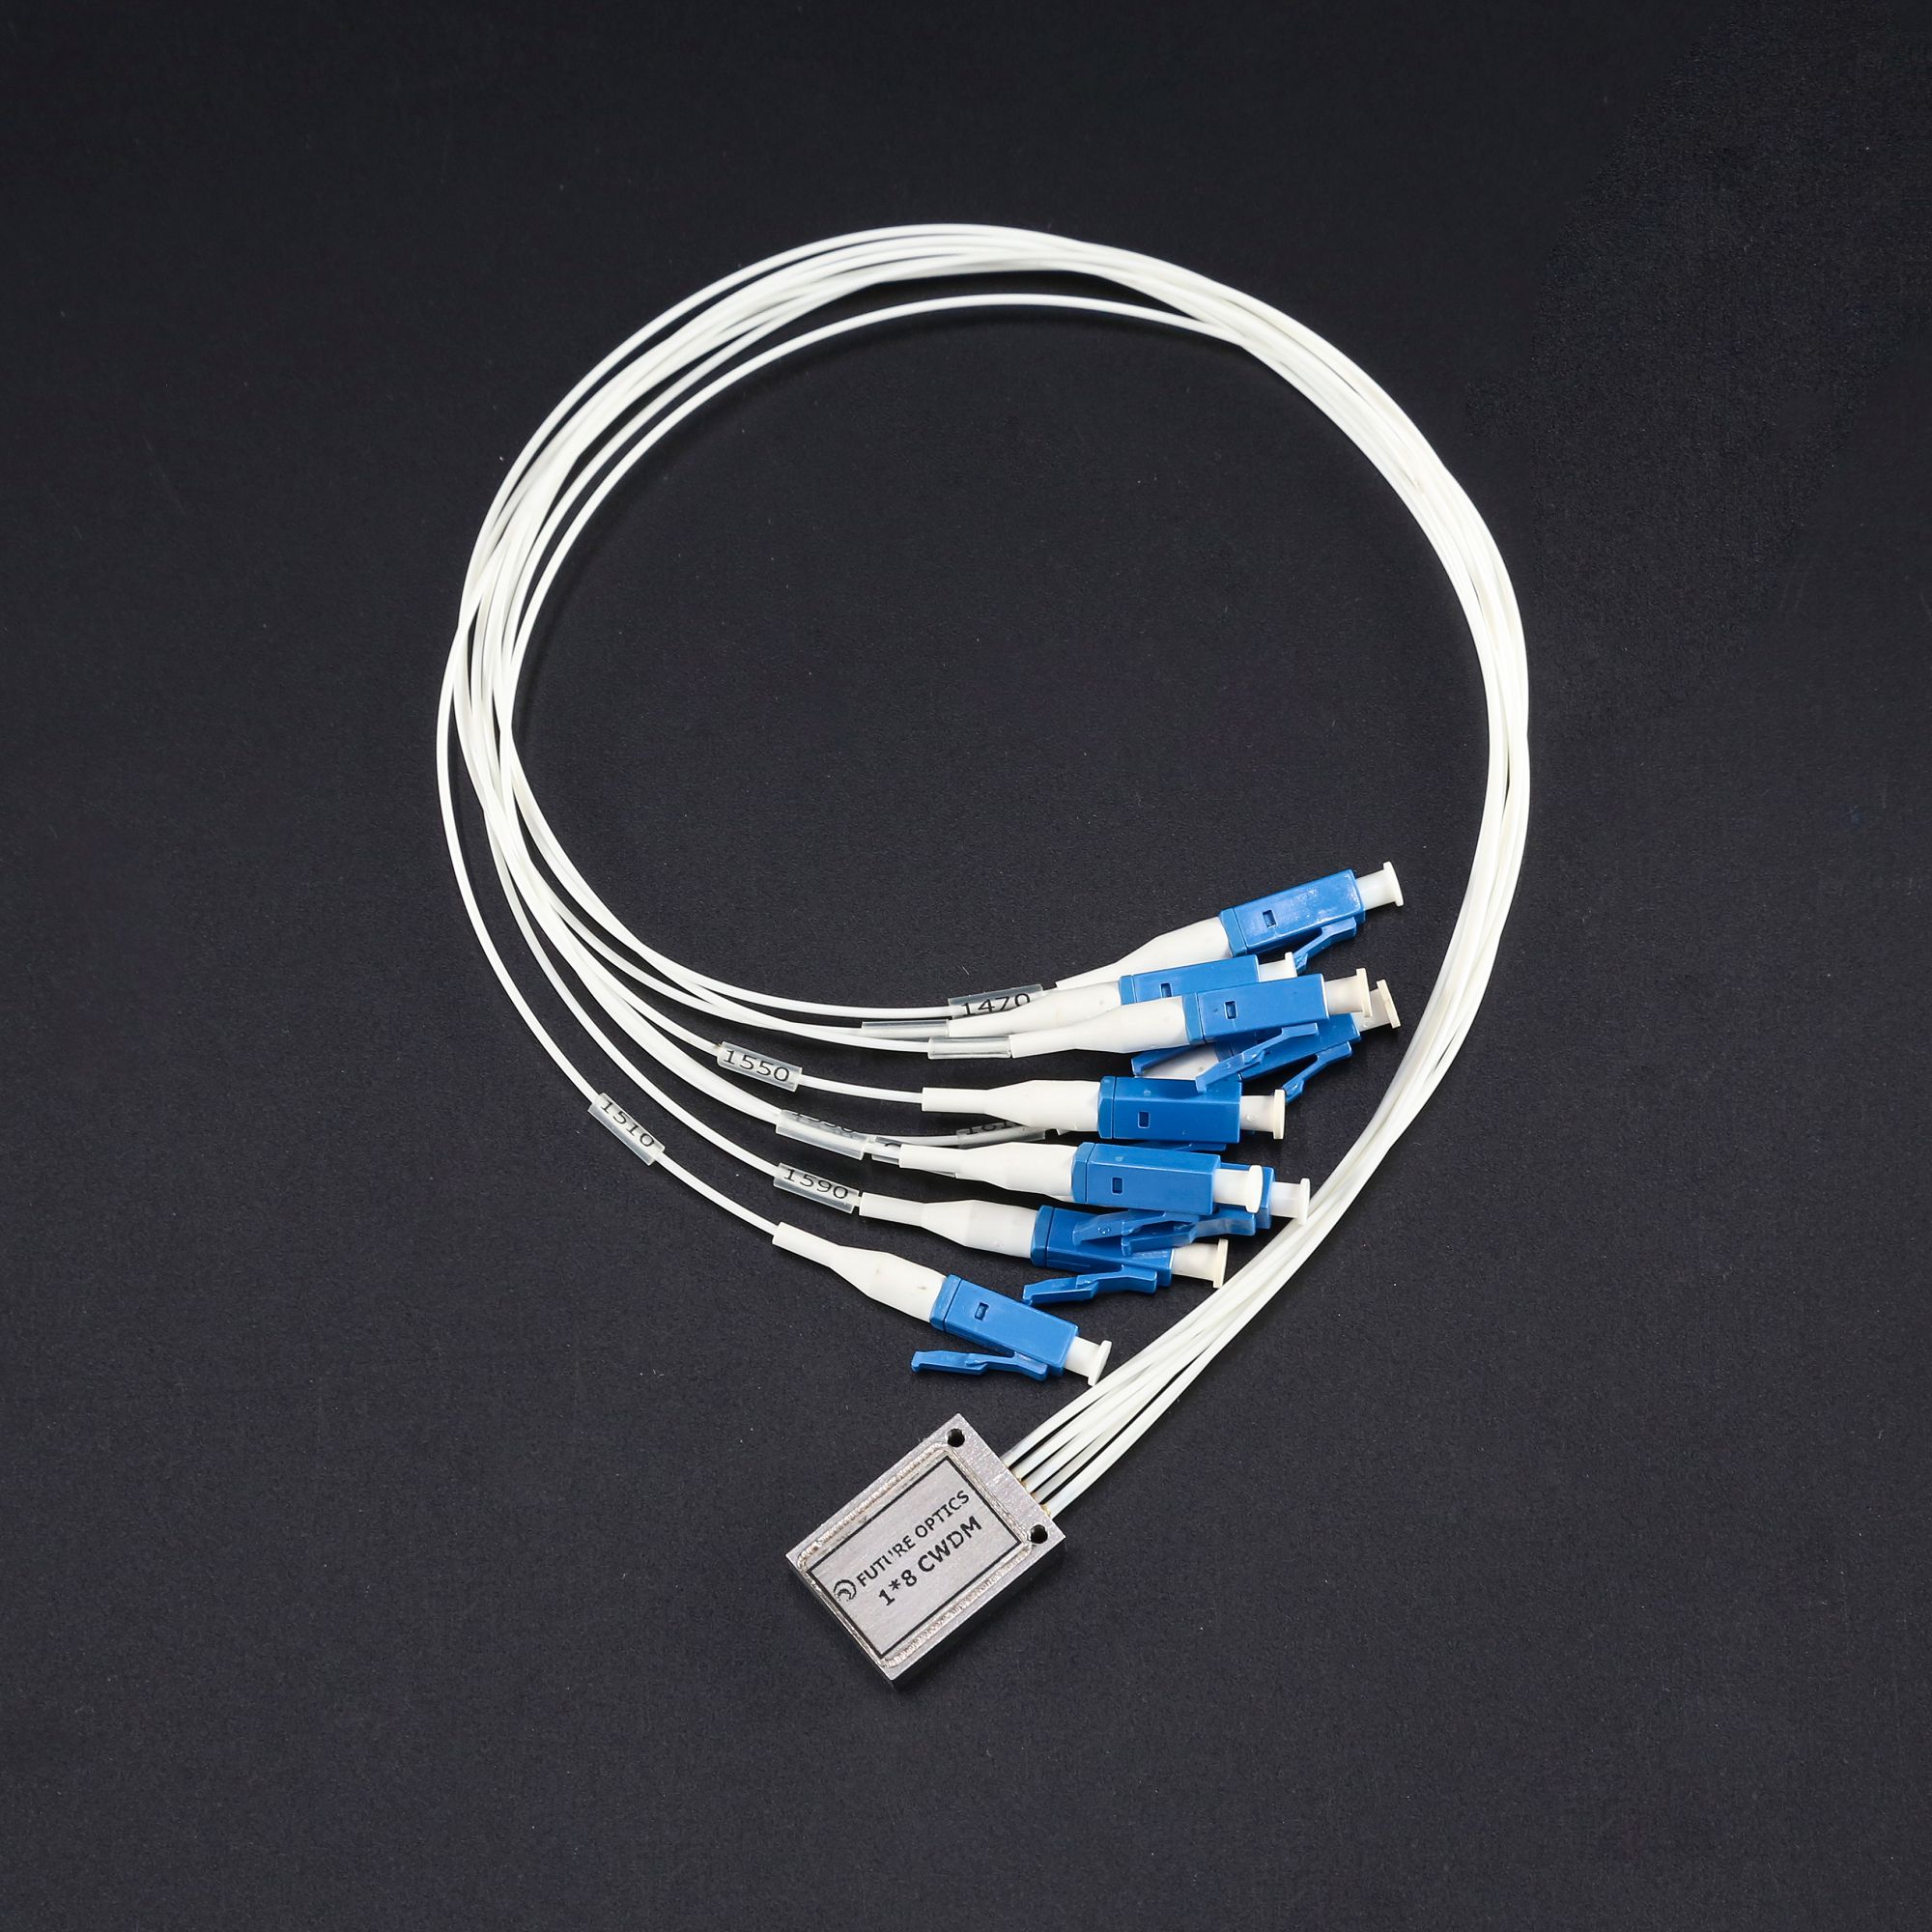 8 Channels 1271-1411nm,Unilateral fiber outlet, High Density,1.2dB Typical IL, LC/UPC, CWDM Mux Demux